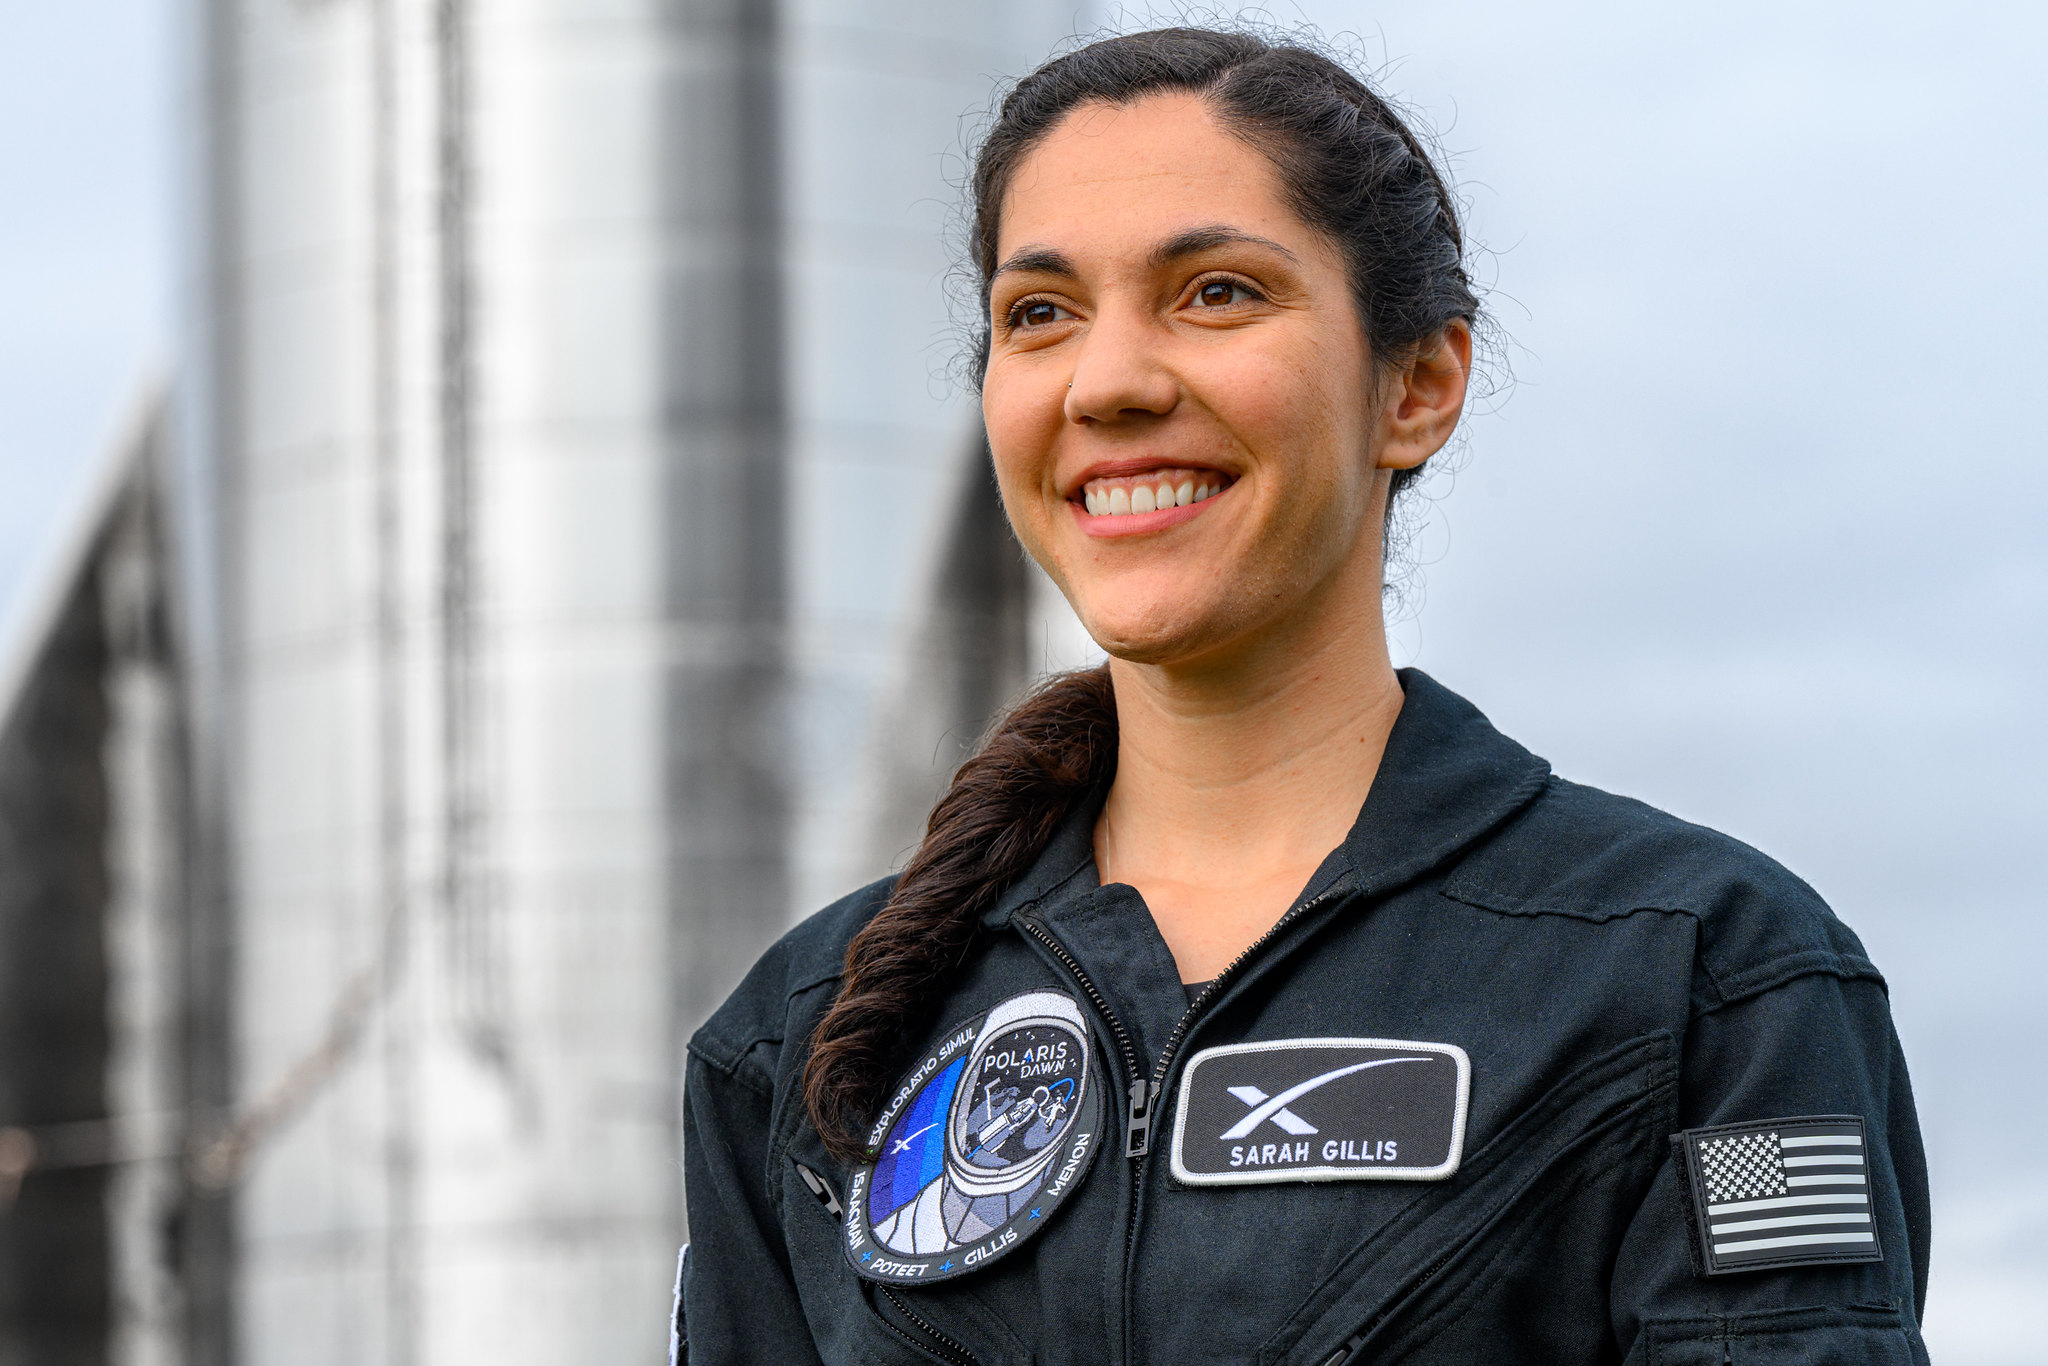 Sarah Gillis, a SpaceX Lead Space Operations Engineer overseeing astronaut training, will serve as a mission specialist on the private Polaris Dawn mission in late 2022.